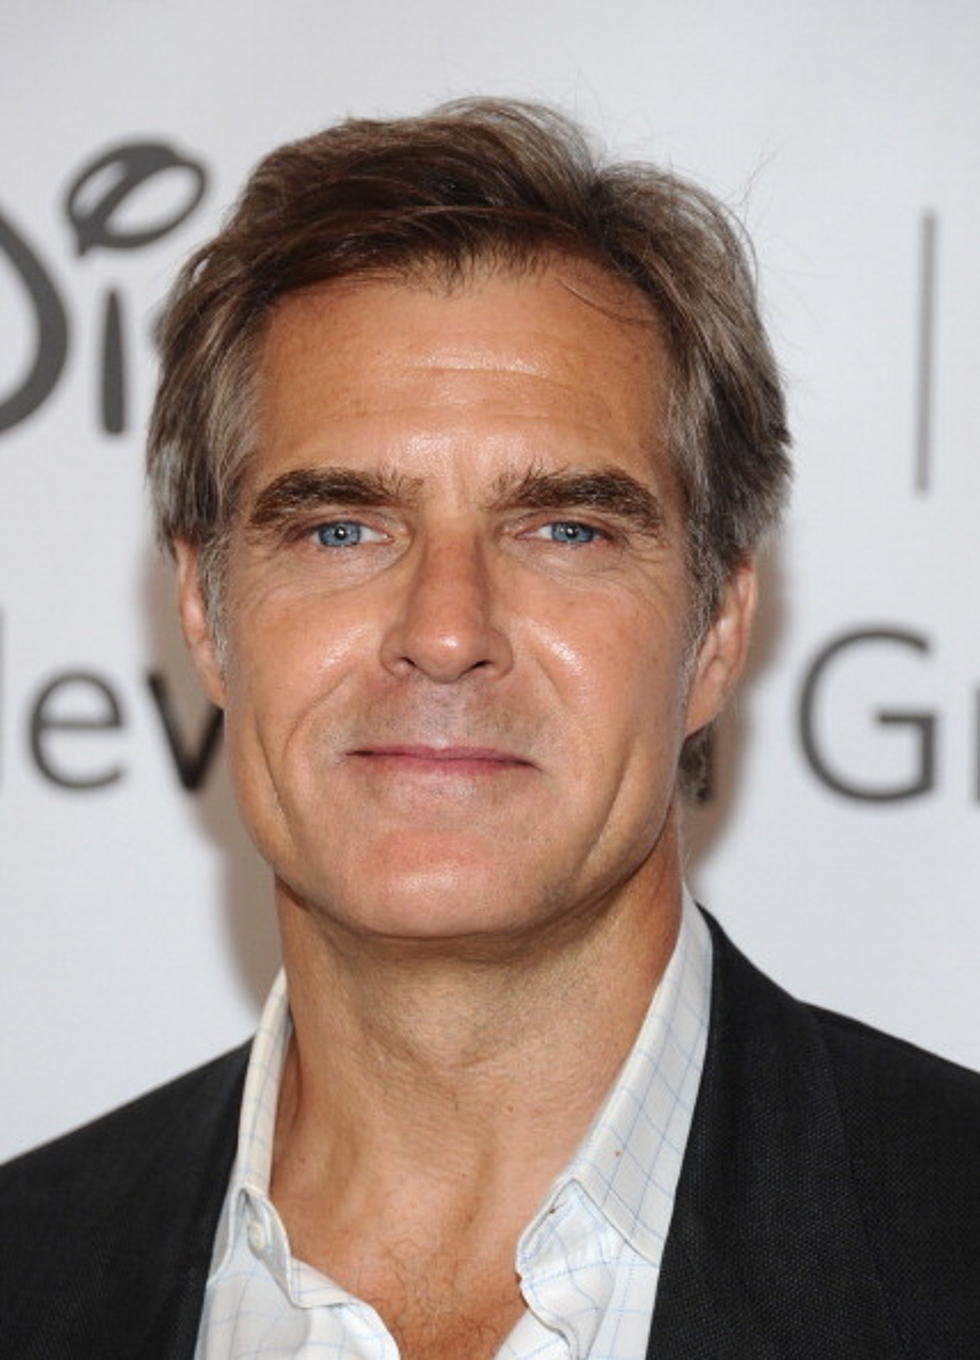 Henry Czerny From ABC’s “Revenge” [INTERVIEW]